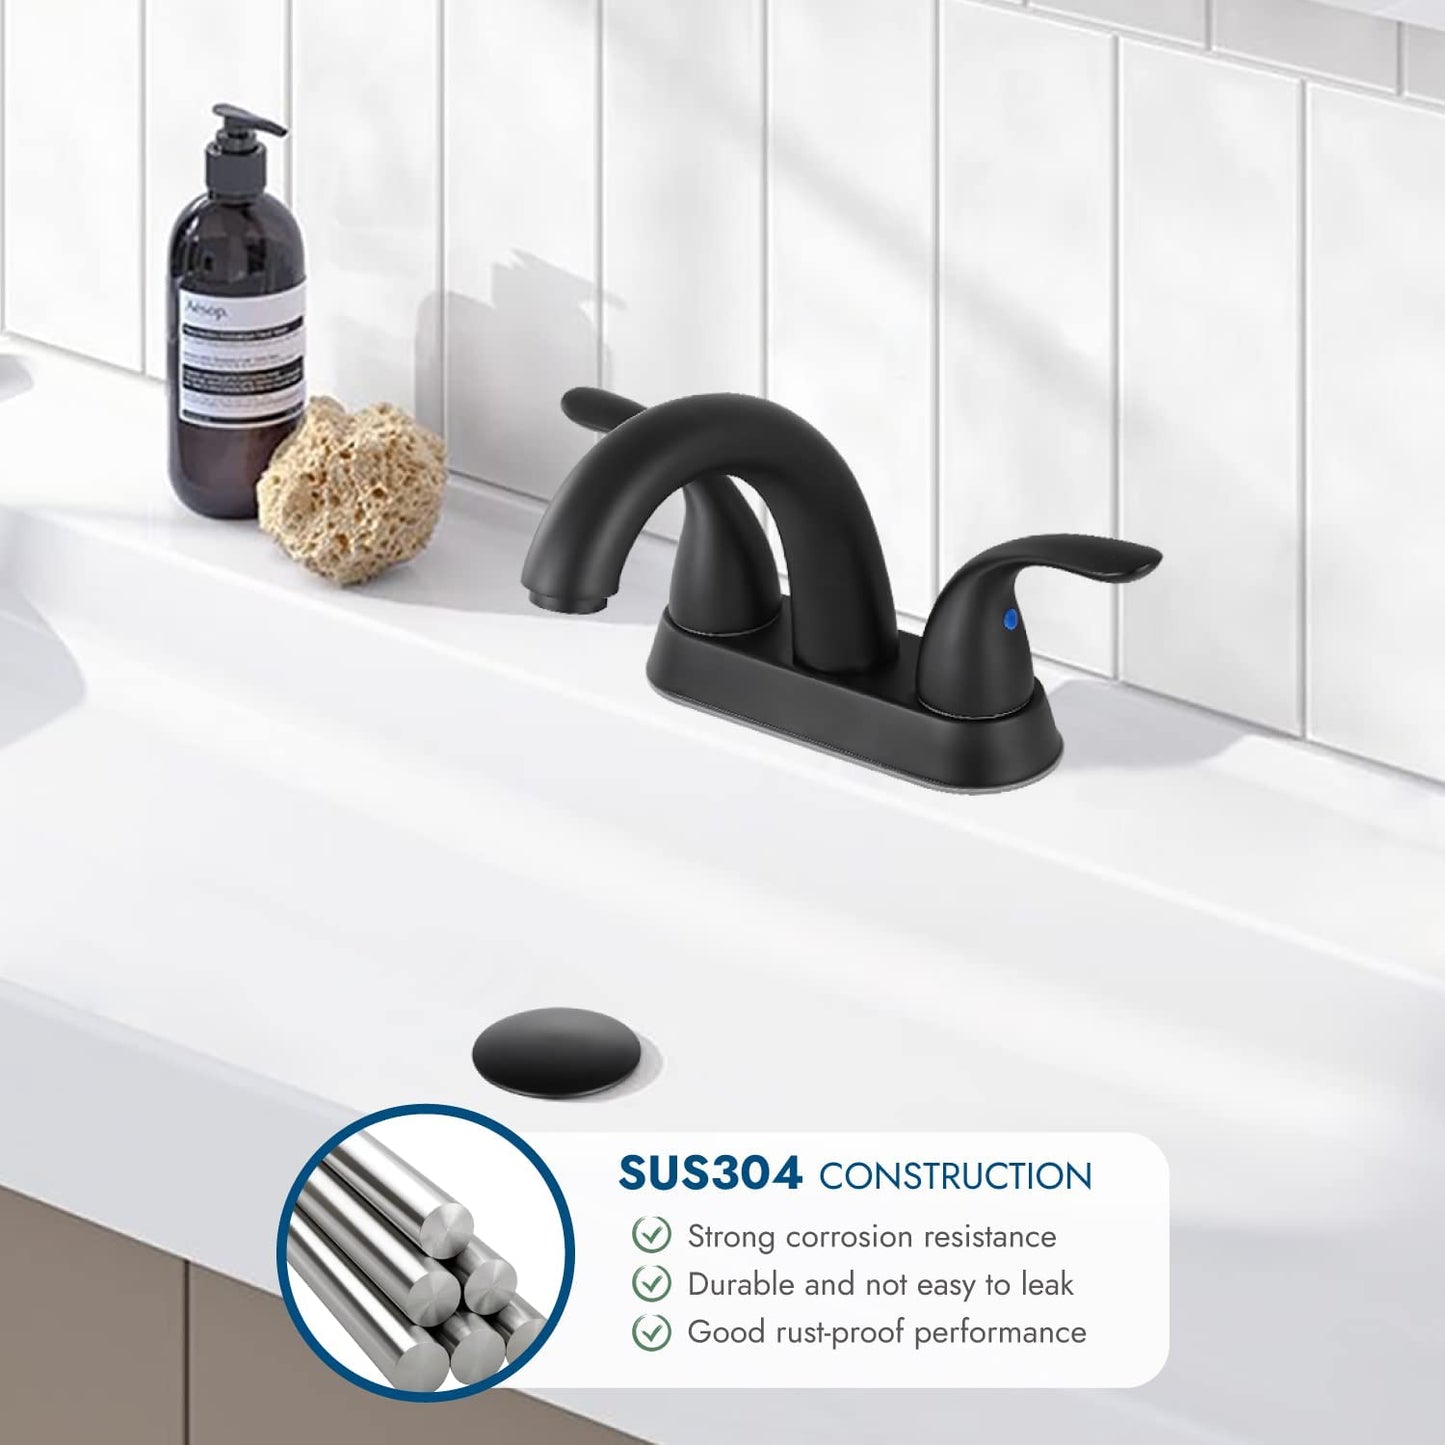 
                  
                    Cinwiny 4 Inch Centerset Bathroom Lavatory Faucet  Deck Mount 2 Handles Bathroom Sink Faucet Mixer Tap with Deck Plate Pop up Drain and Water Supply Hoses
                  
                